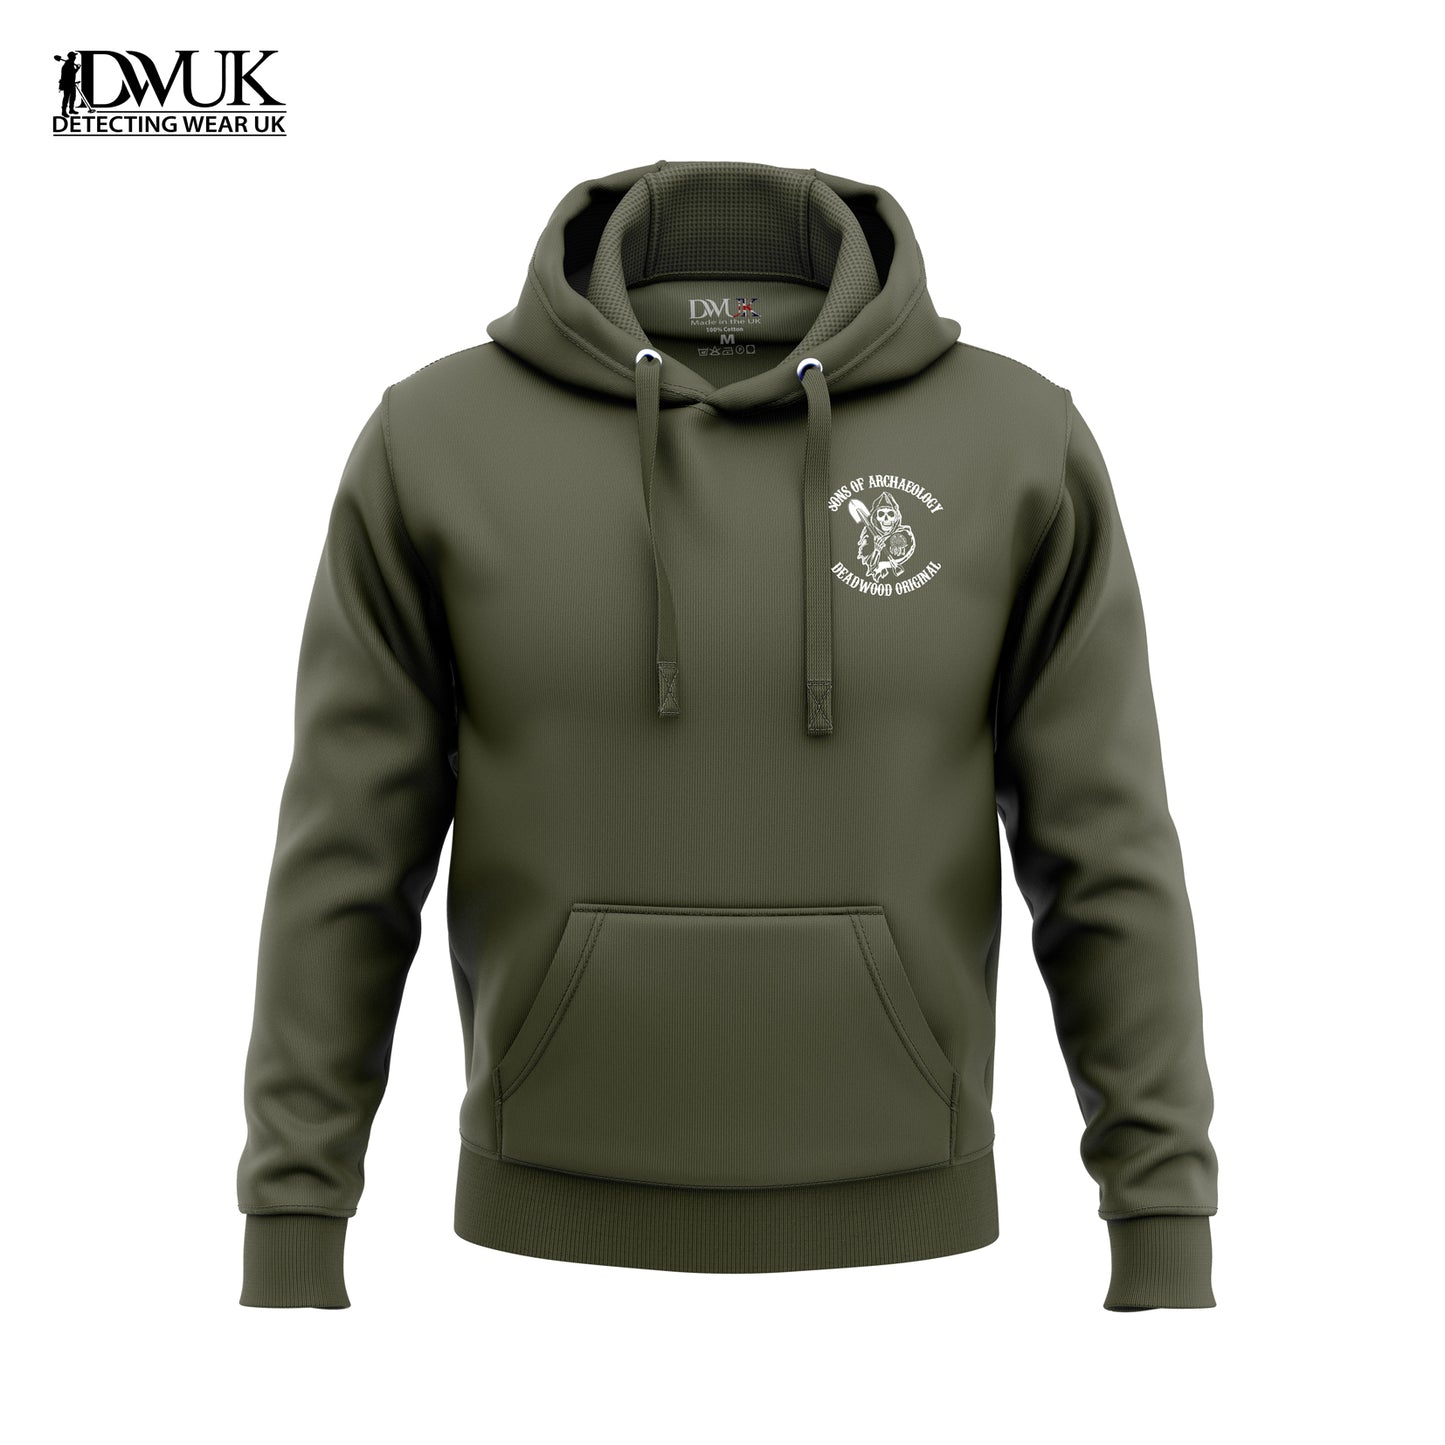 Sons of Archaeology Hoodie